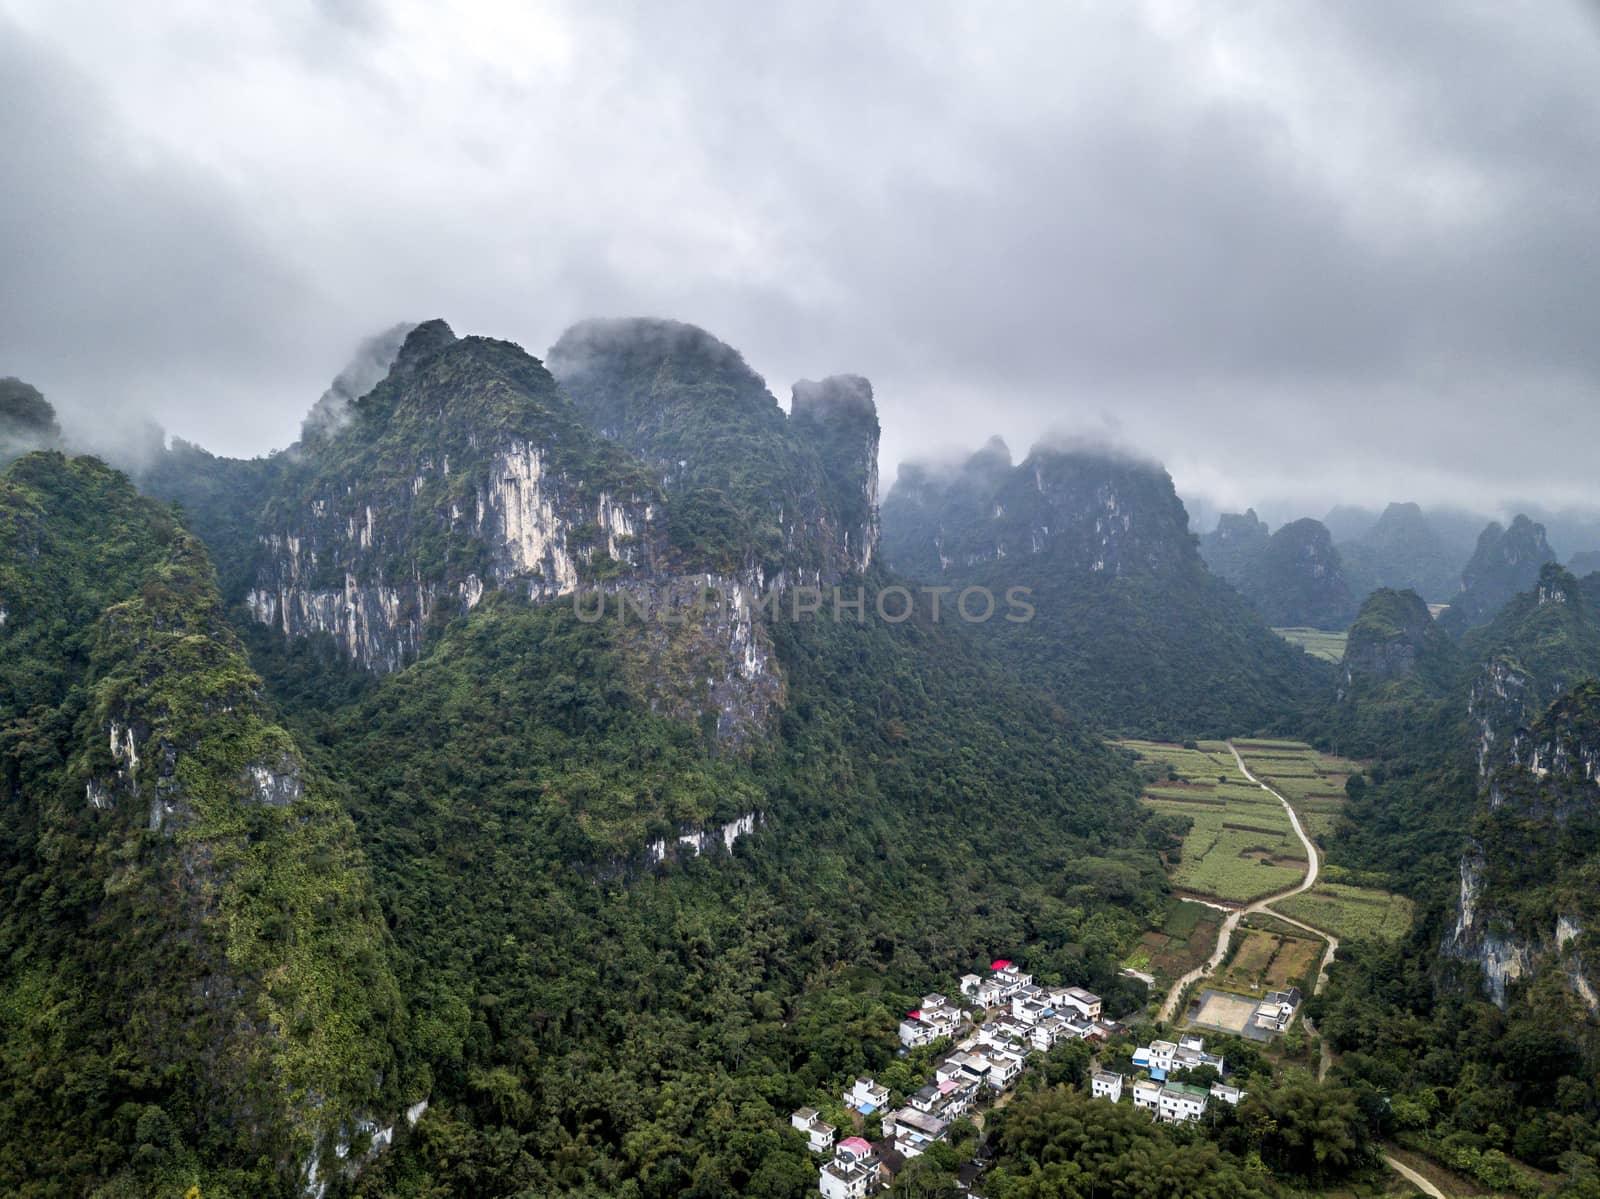 The small village in the karst mountains of Chongzuo, Guangxi,China.